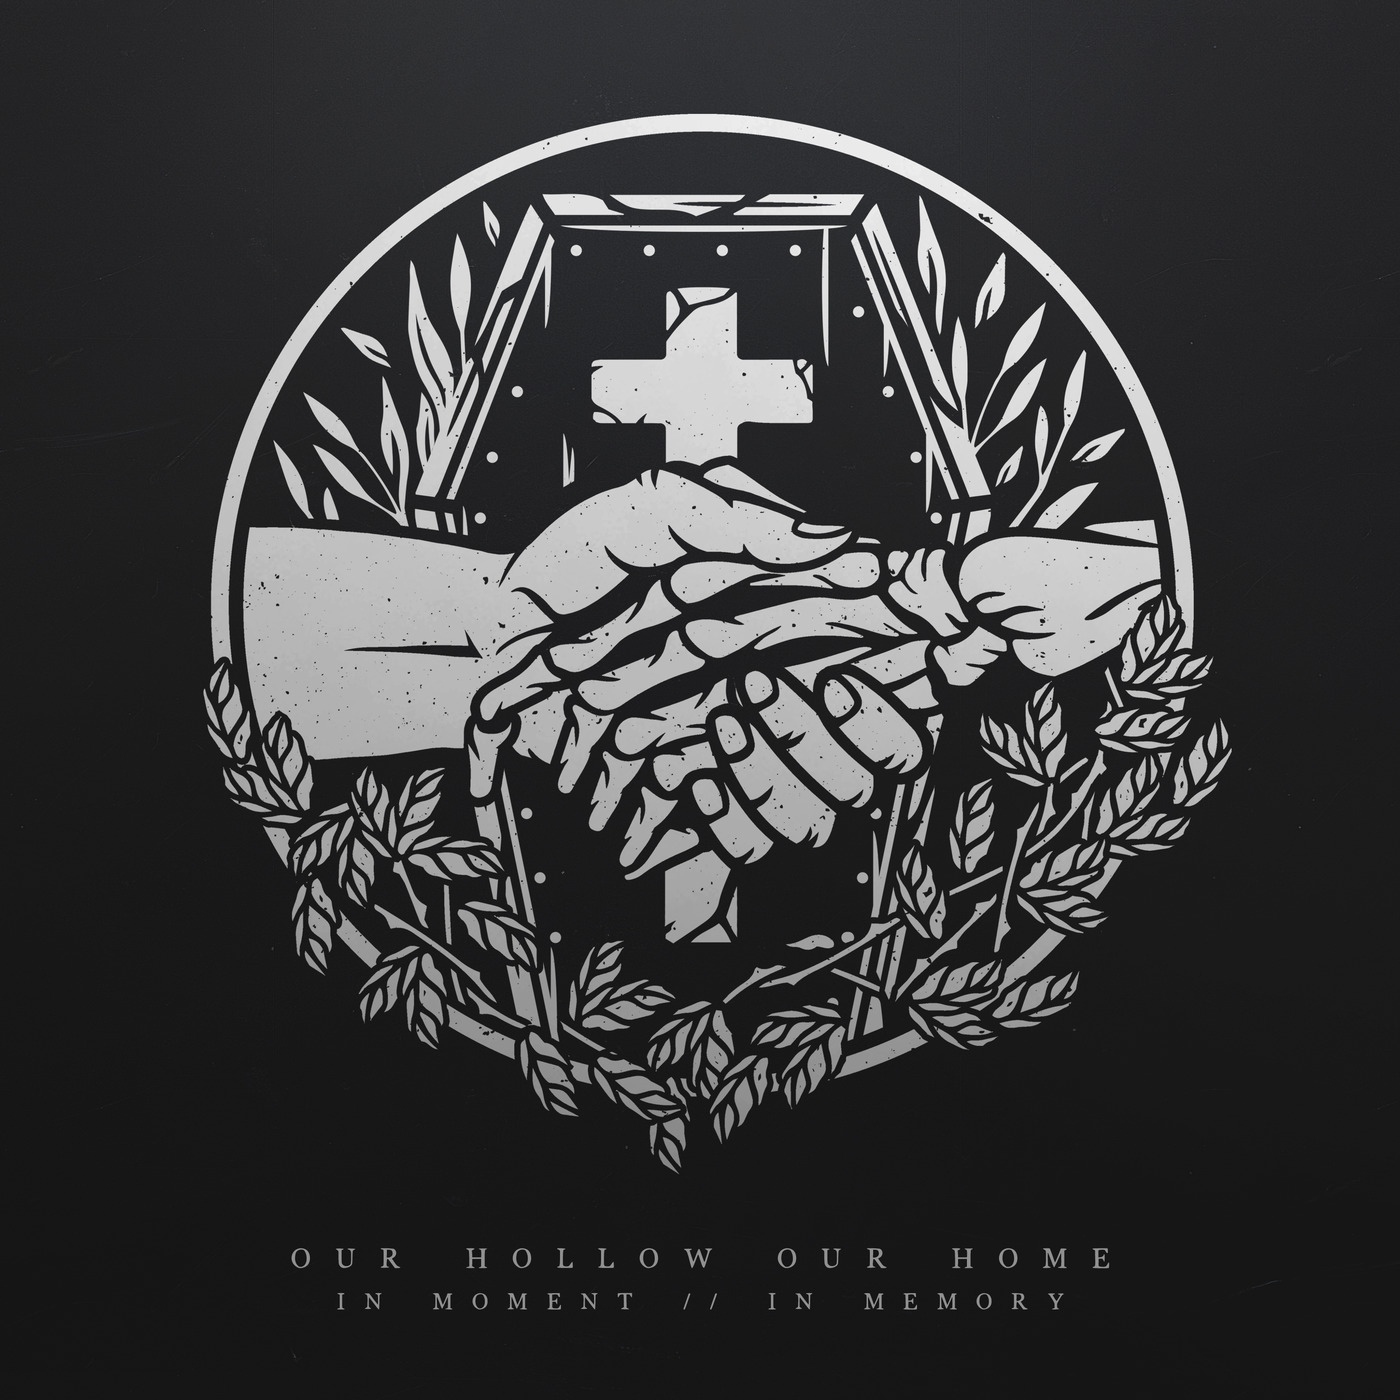 Our Hollow, Our Home - In Moment / / In Memory (2018)